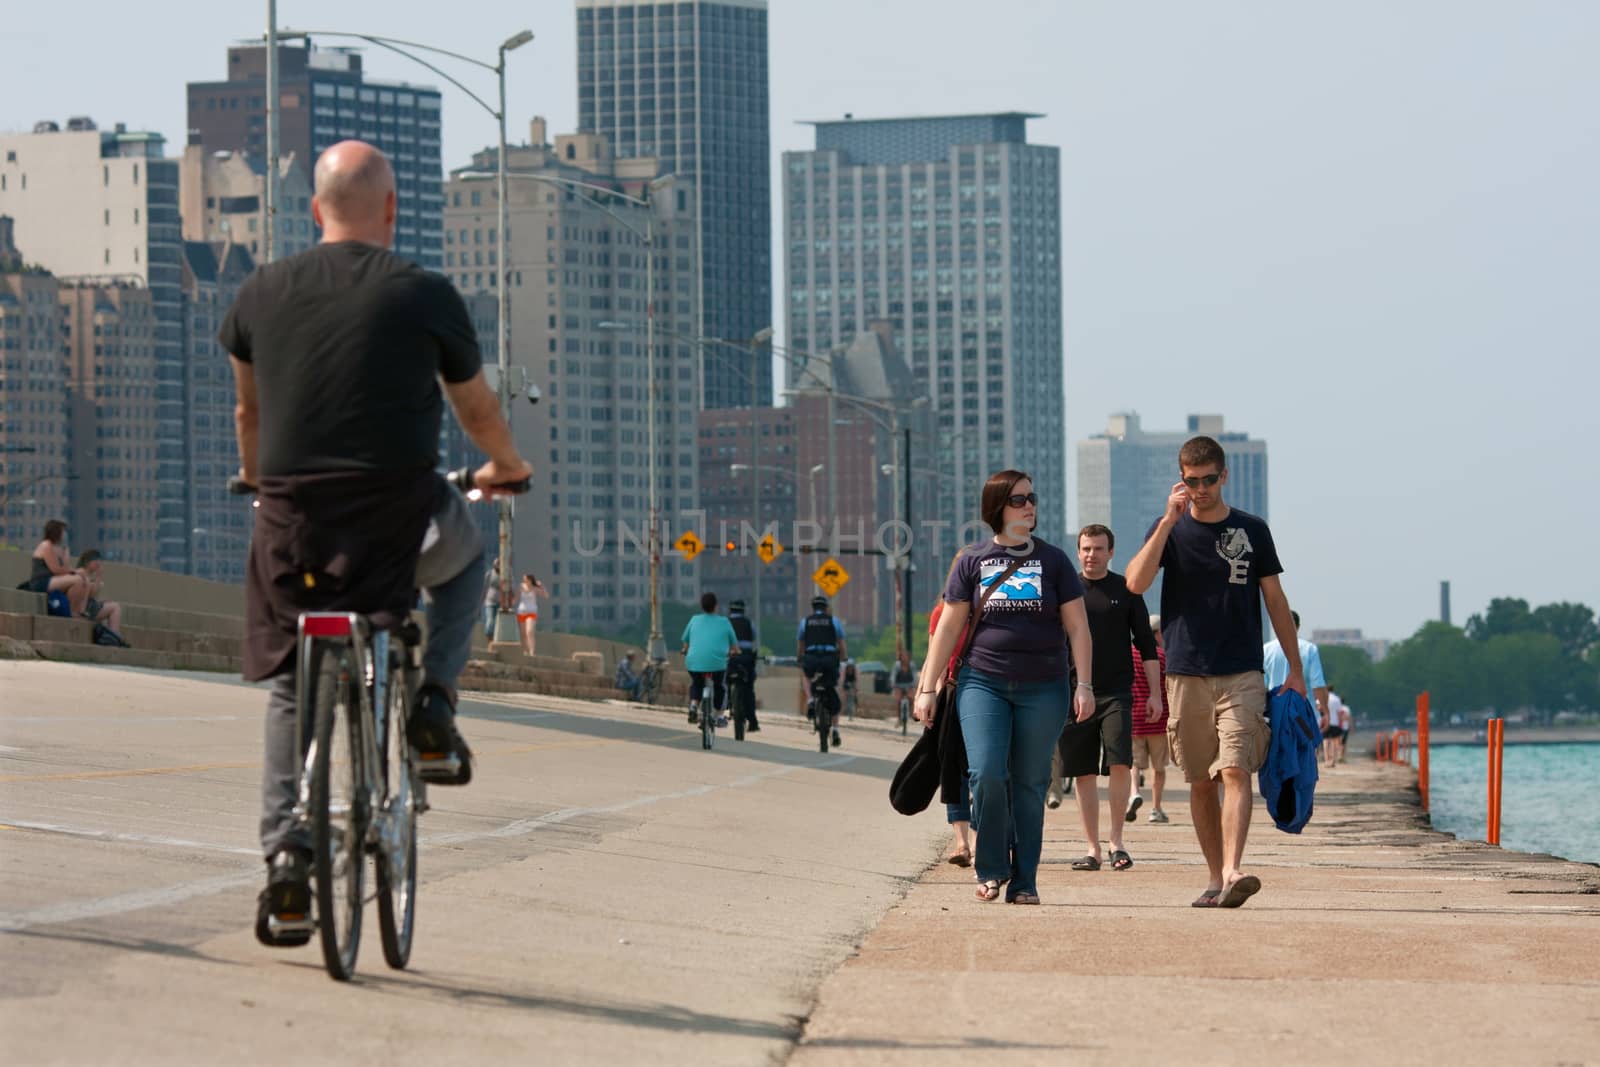 CHICAGO, IL - MAY 26, 2012:  Pedestrians and people on bicycles enjoy being outdoors along the Lake Michigan shoreline, just off Chicago's famous Lakeshore Drive.  The warm temperatures and Memorial Day holiday weekend brought thousands of people outdoors.